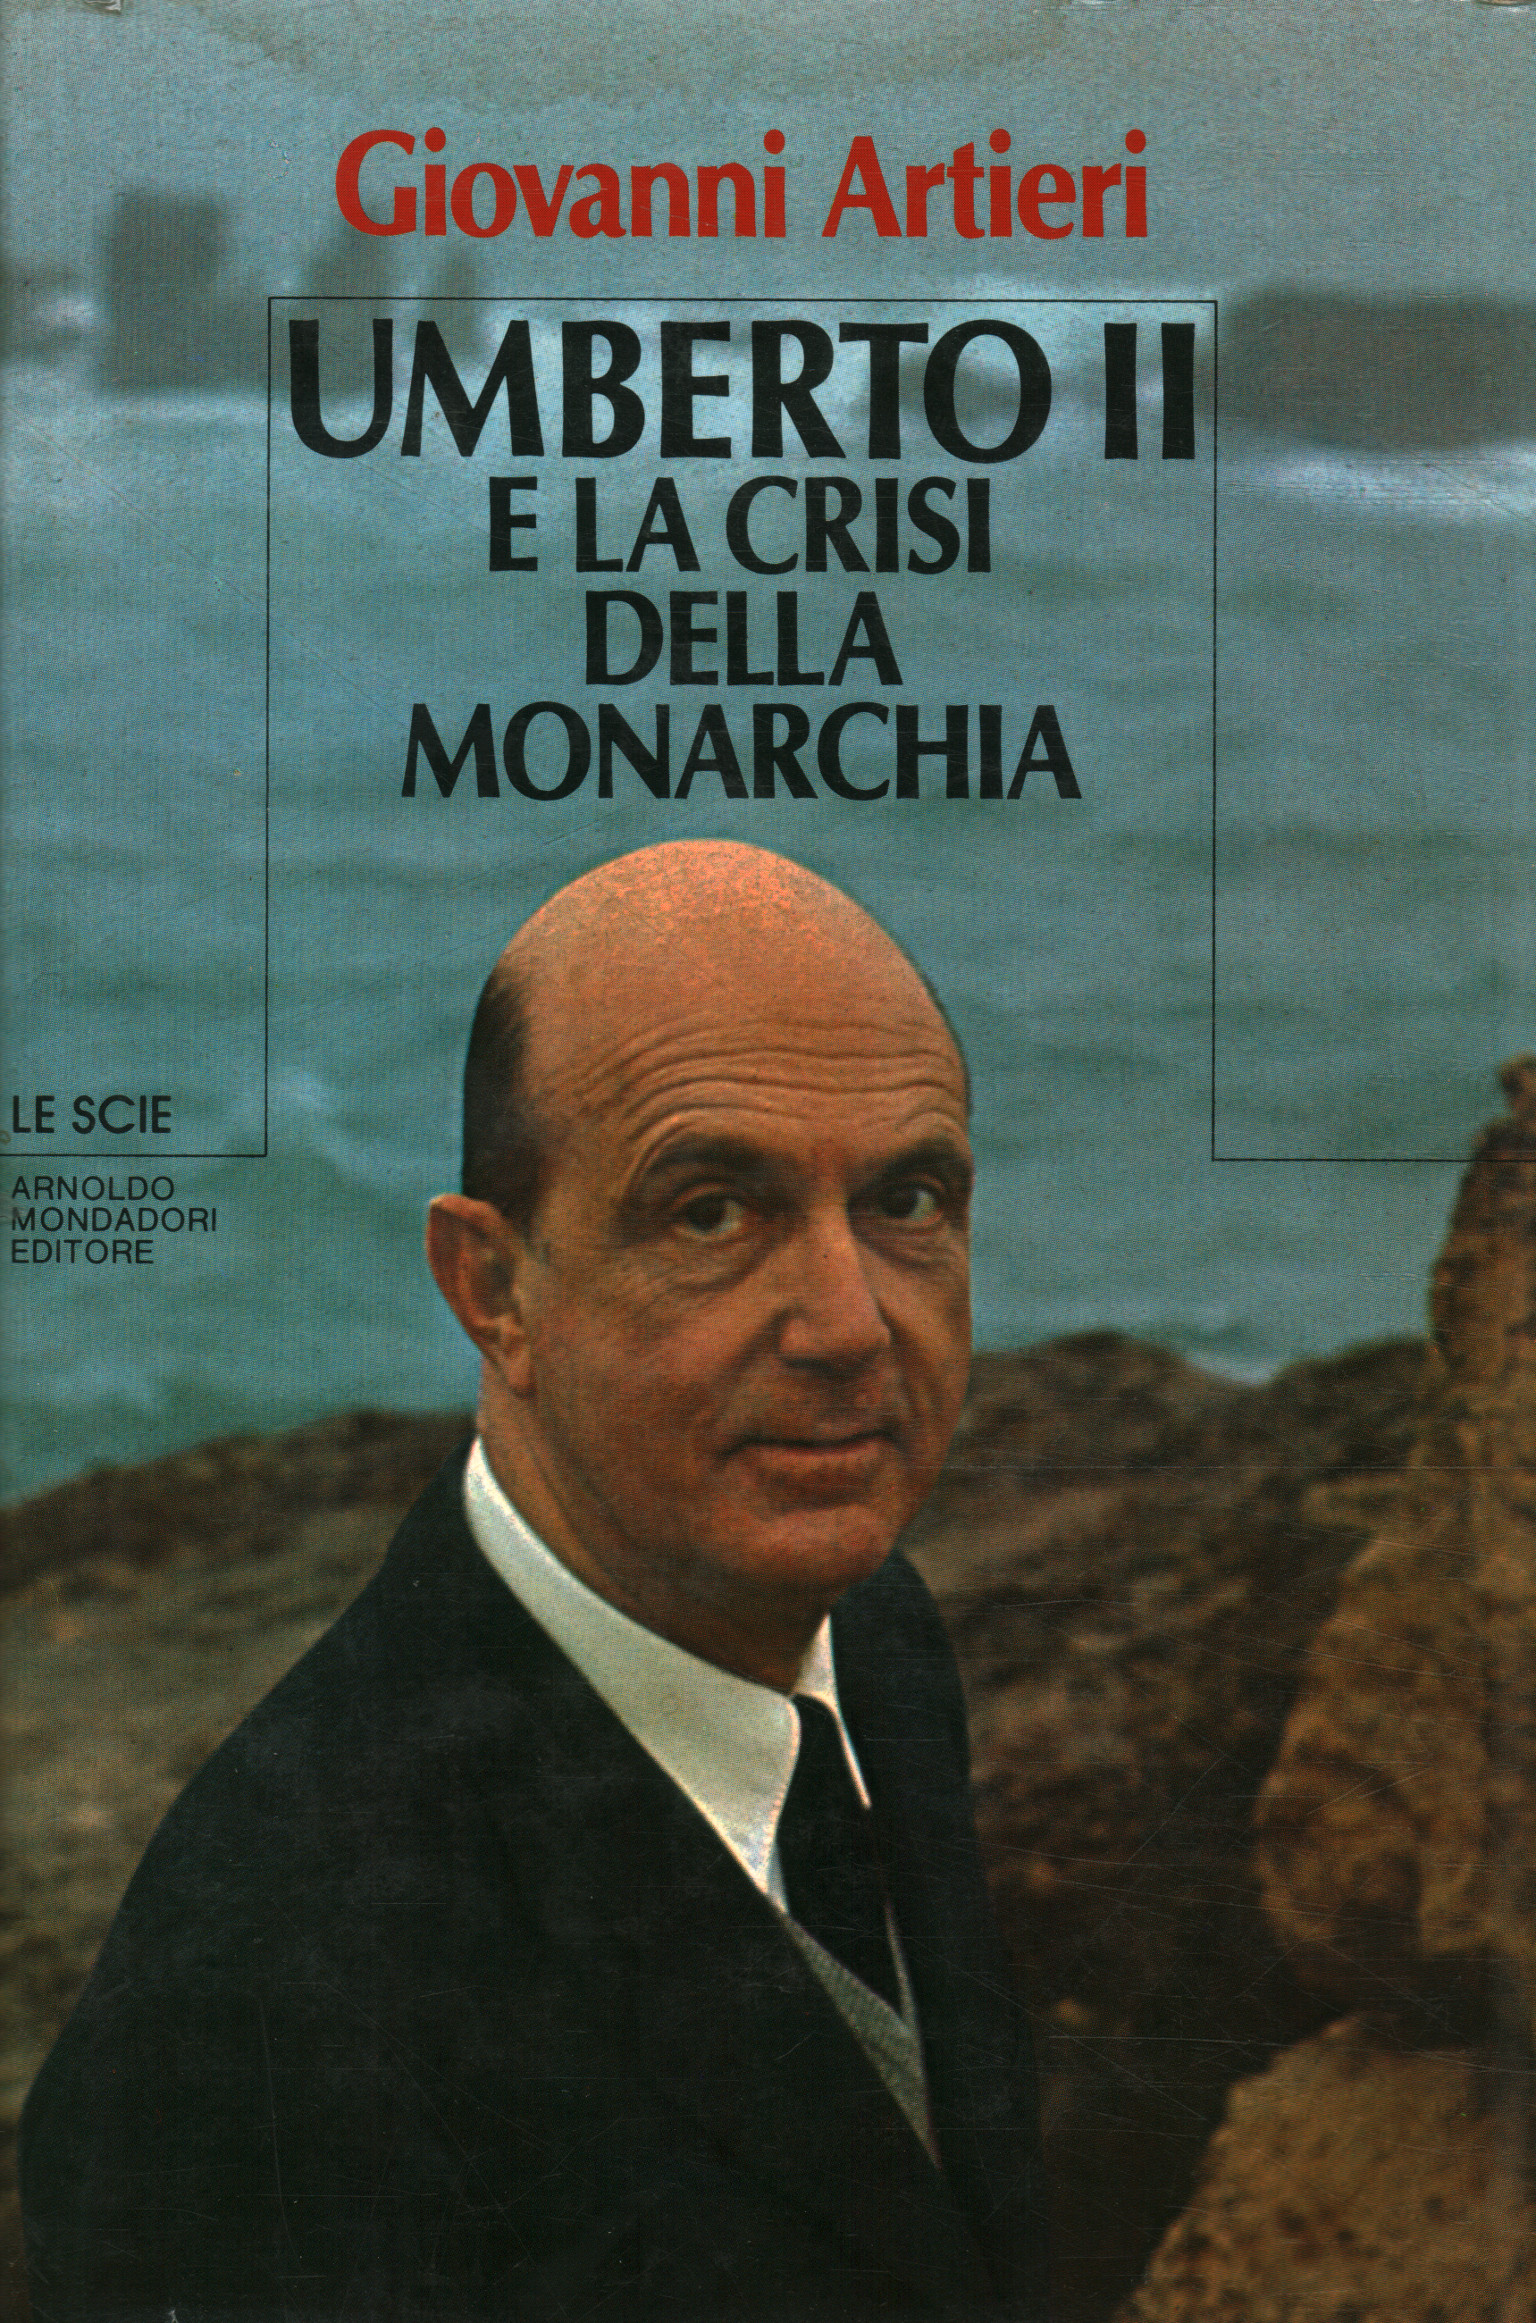 Umberto II and the crisis of the monarchy